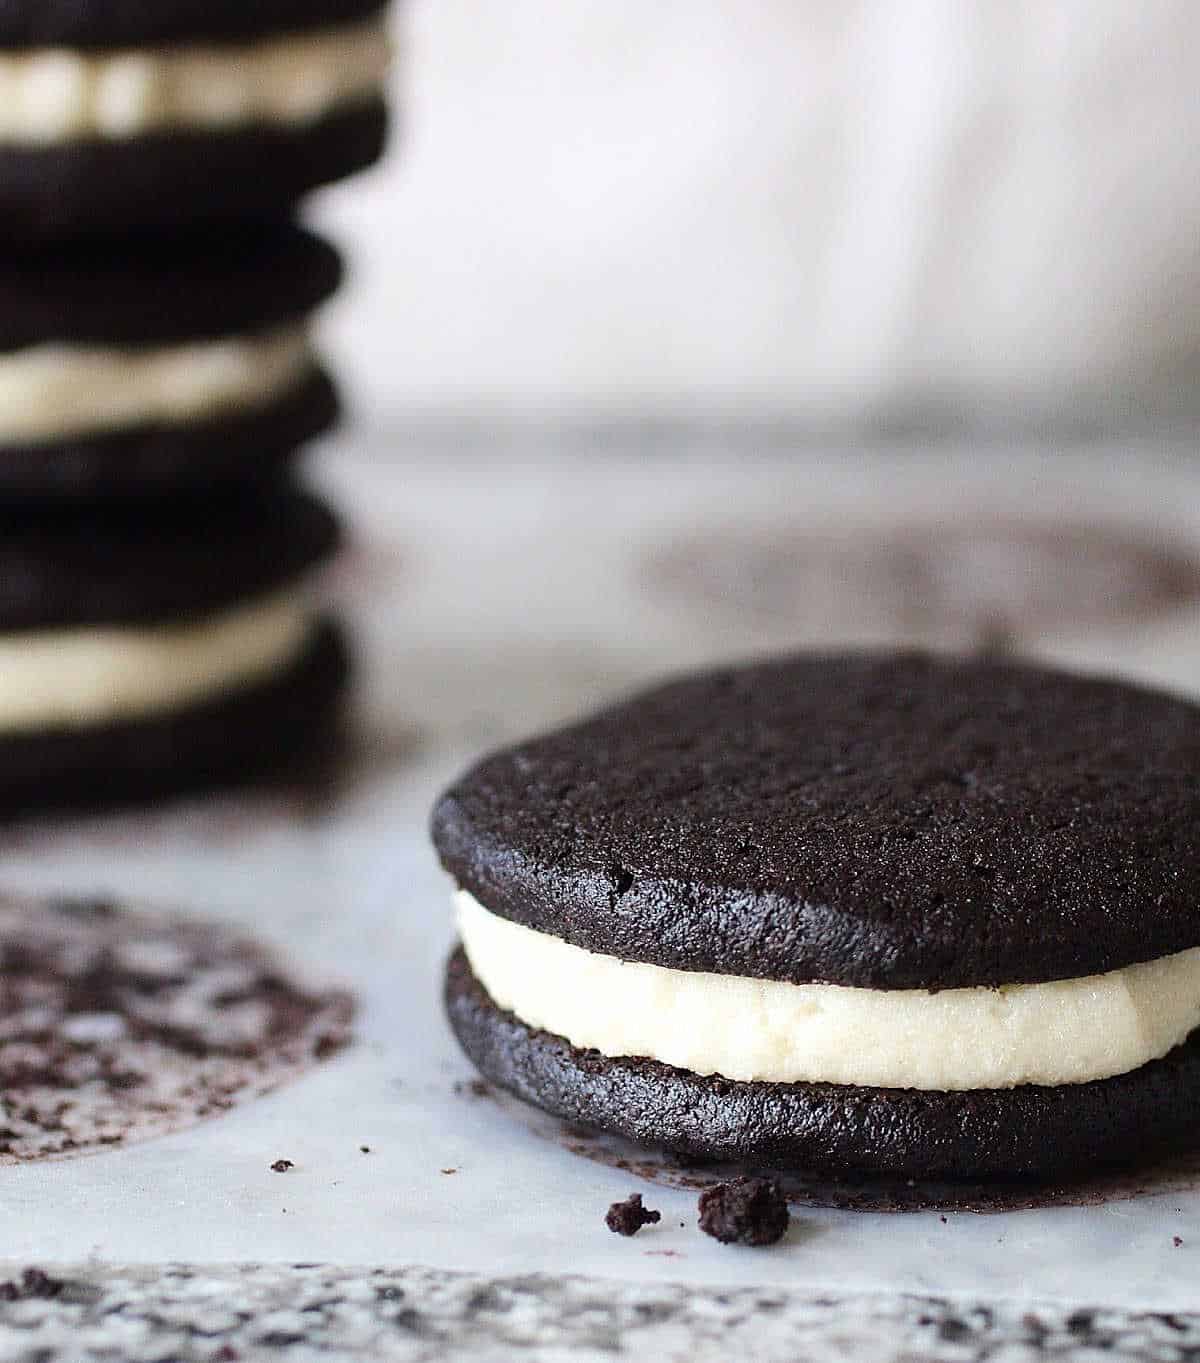 Single dark chocolate homemade Oreo cookie on parchment paper; stack of cookies in the background.